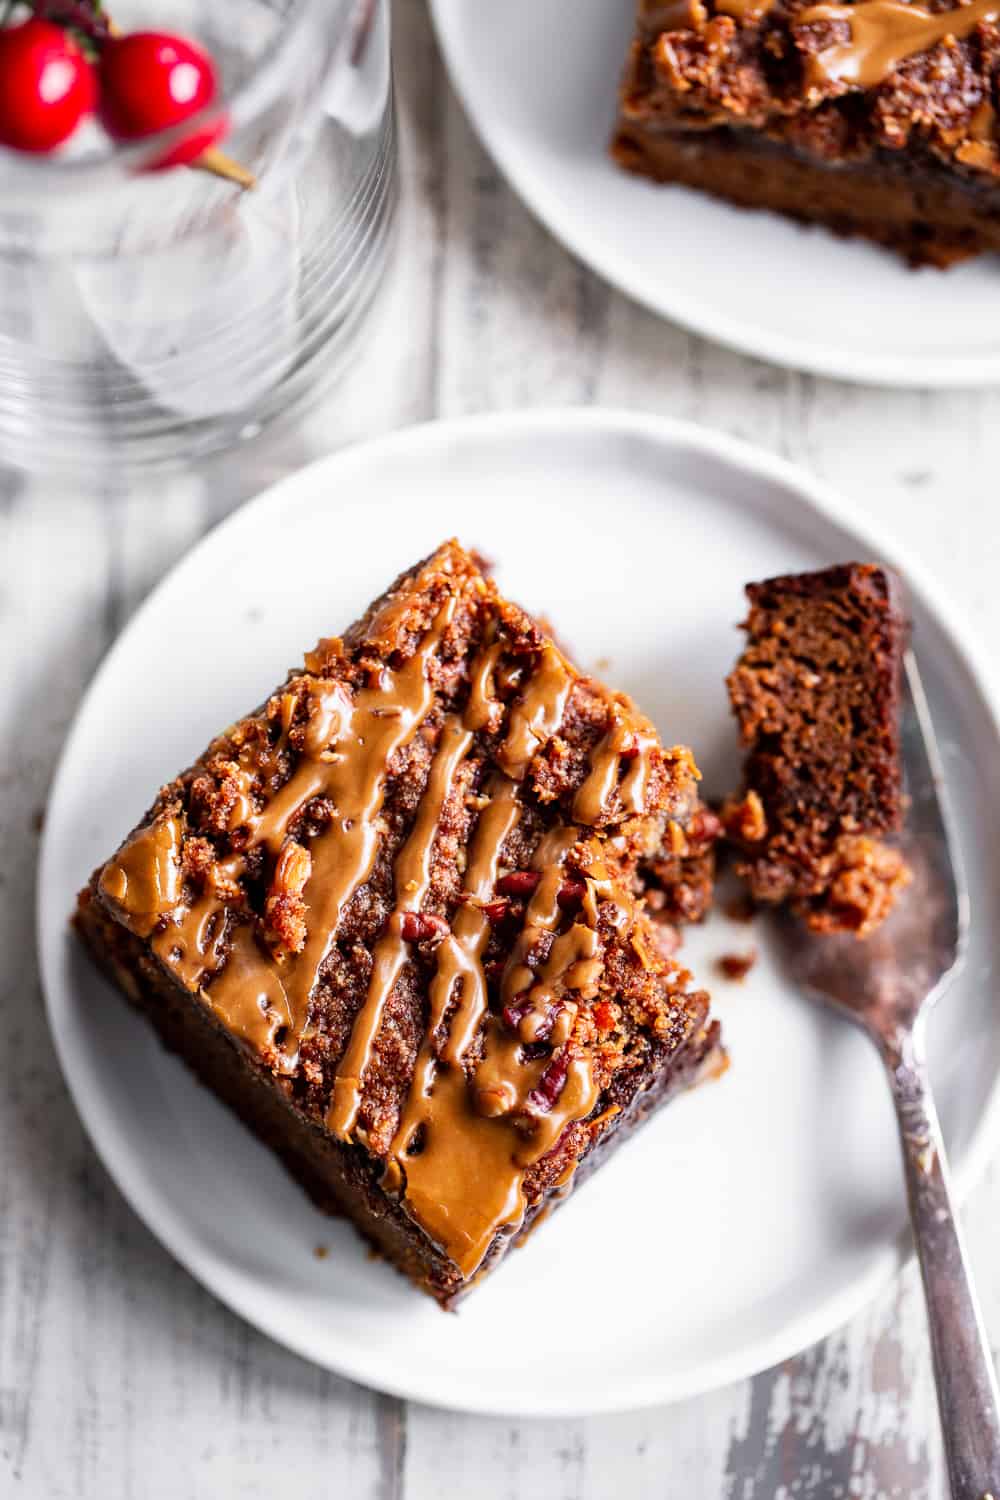 This Paleo Pumpkin Gingerbread Coffee Cake has it all!  Moist cake with sweet warm pumpkin spices and molasses topped with an addicting crumb topping and gingerbread icing!  Fancy enough to serve to guests but so delicious that you’ll want to have some to snack on all season long.